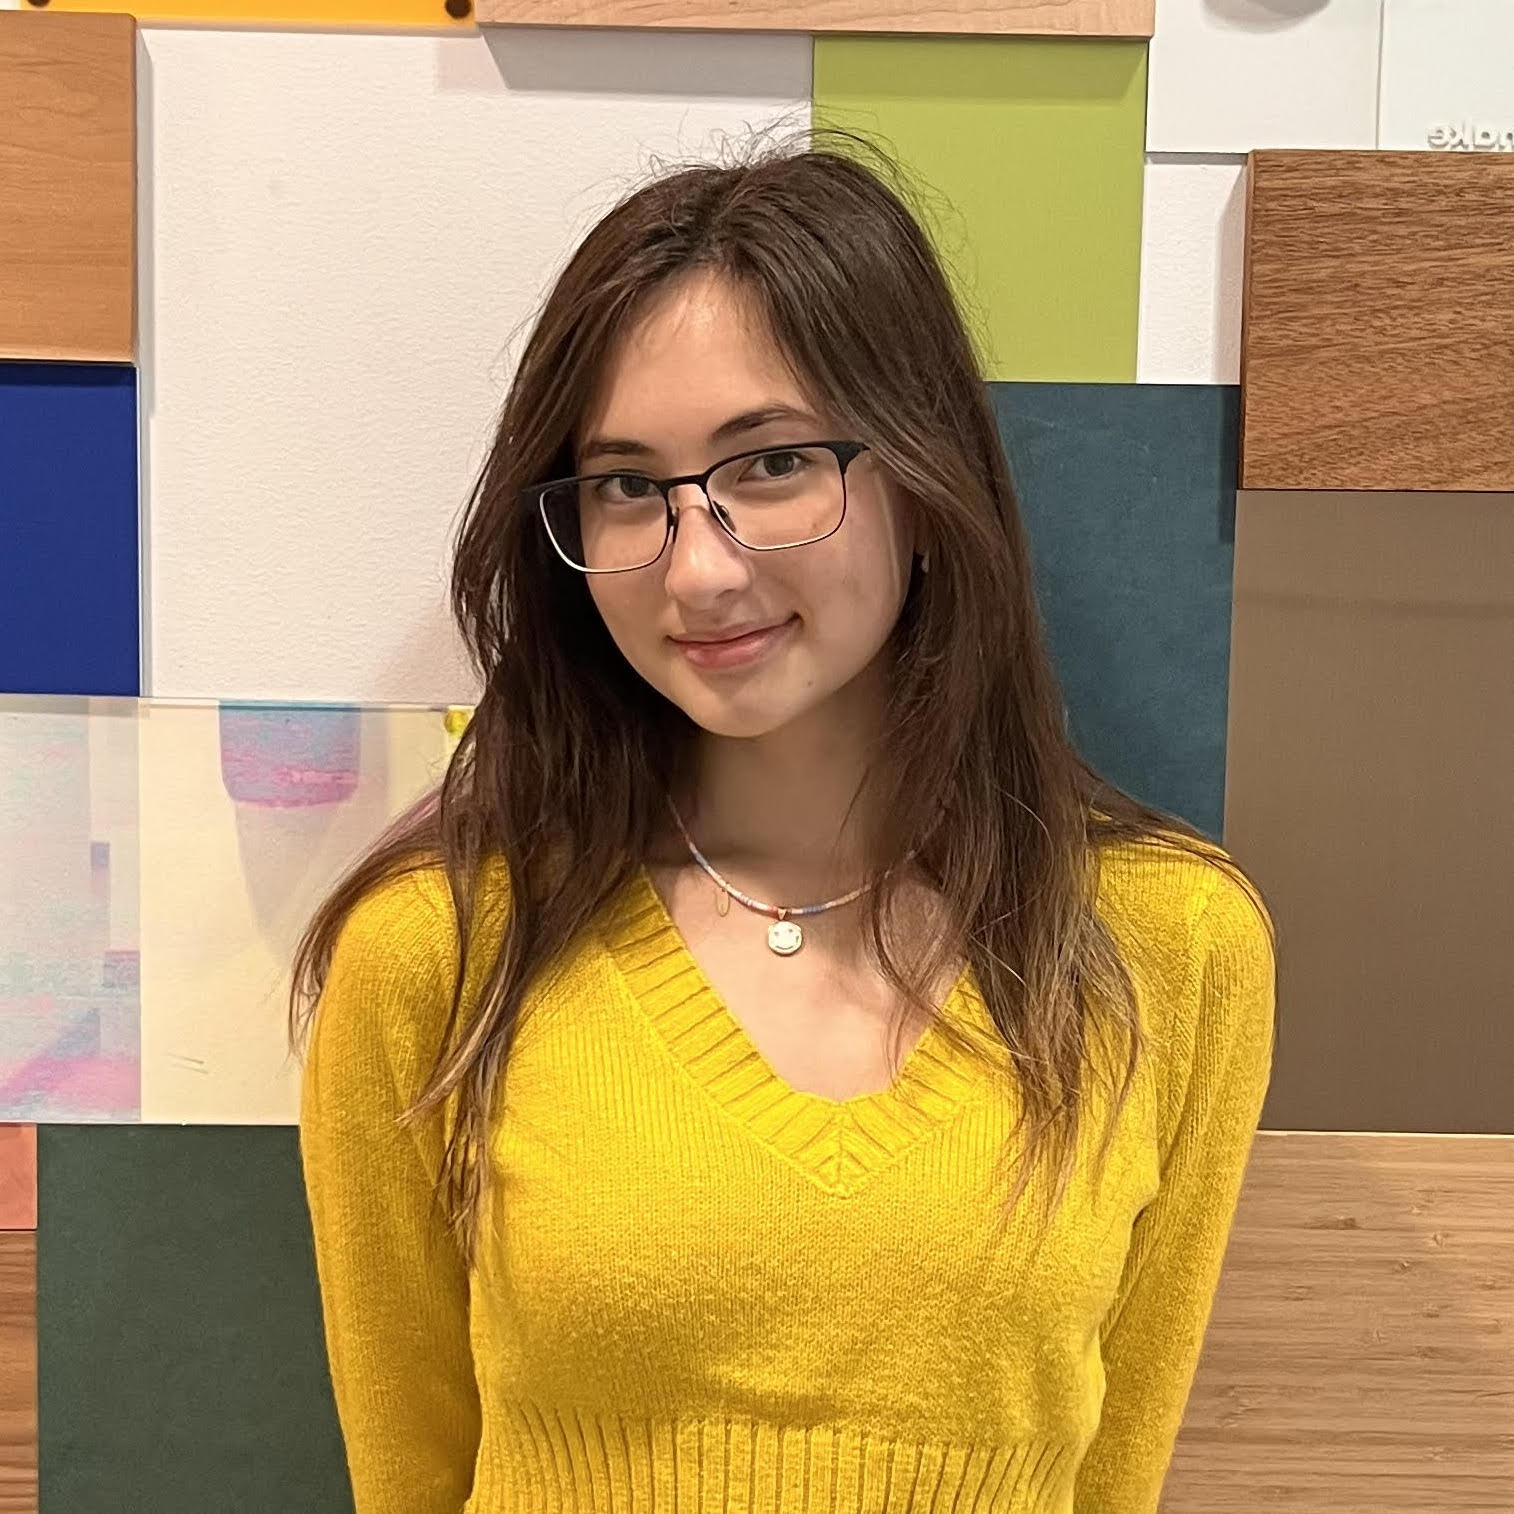 Victoria has been a student at Northwestern for two years and has been interested in sustainability for all her life. She wants to pursue studies and career paths involved in green energy. In her free time, she enjoys gardening native pollinator plants. Her favorite plant is milkweed.LINKEDINLINKhttps://www.linkedin.com/in/victoria-brown-16190b239